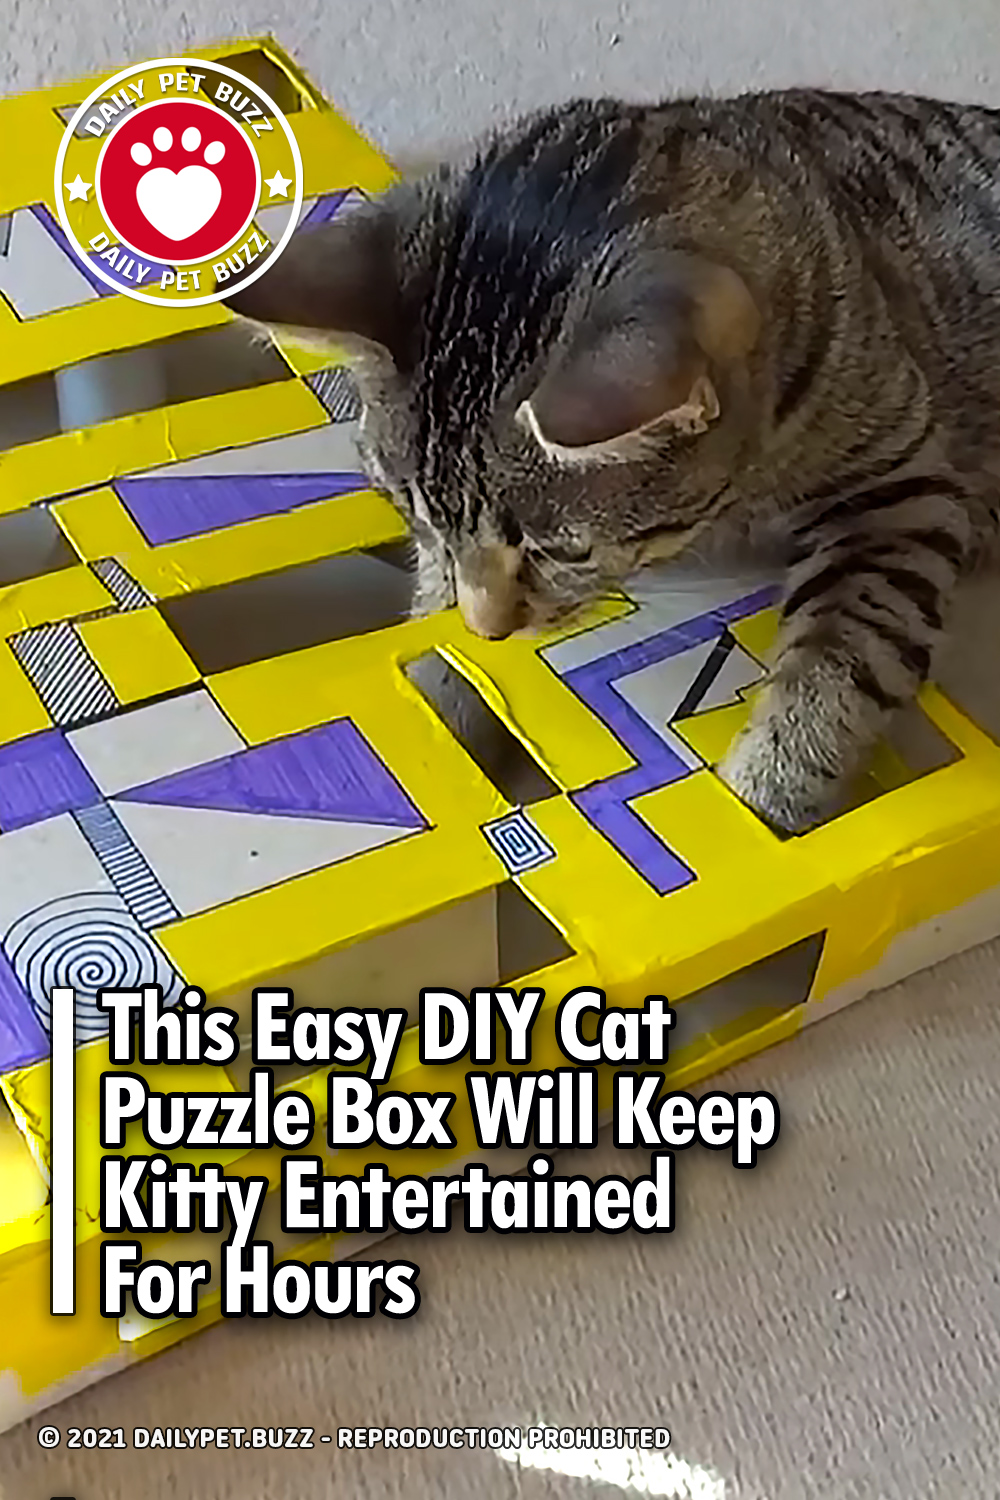 This Easy DIY Cat Puzzle Box Will Keep Kitty Entertained For Hours